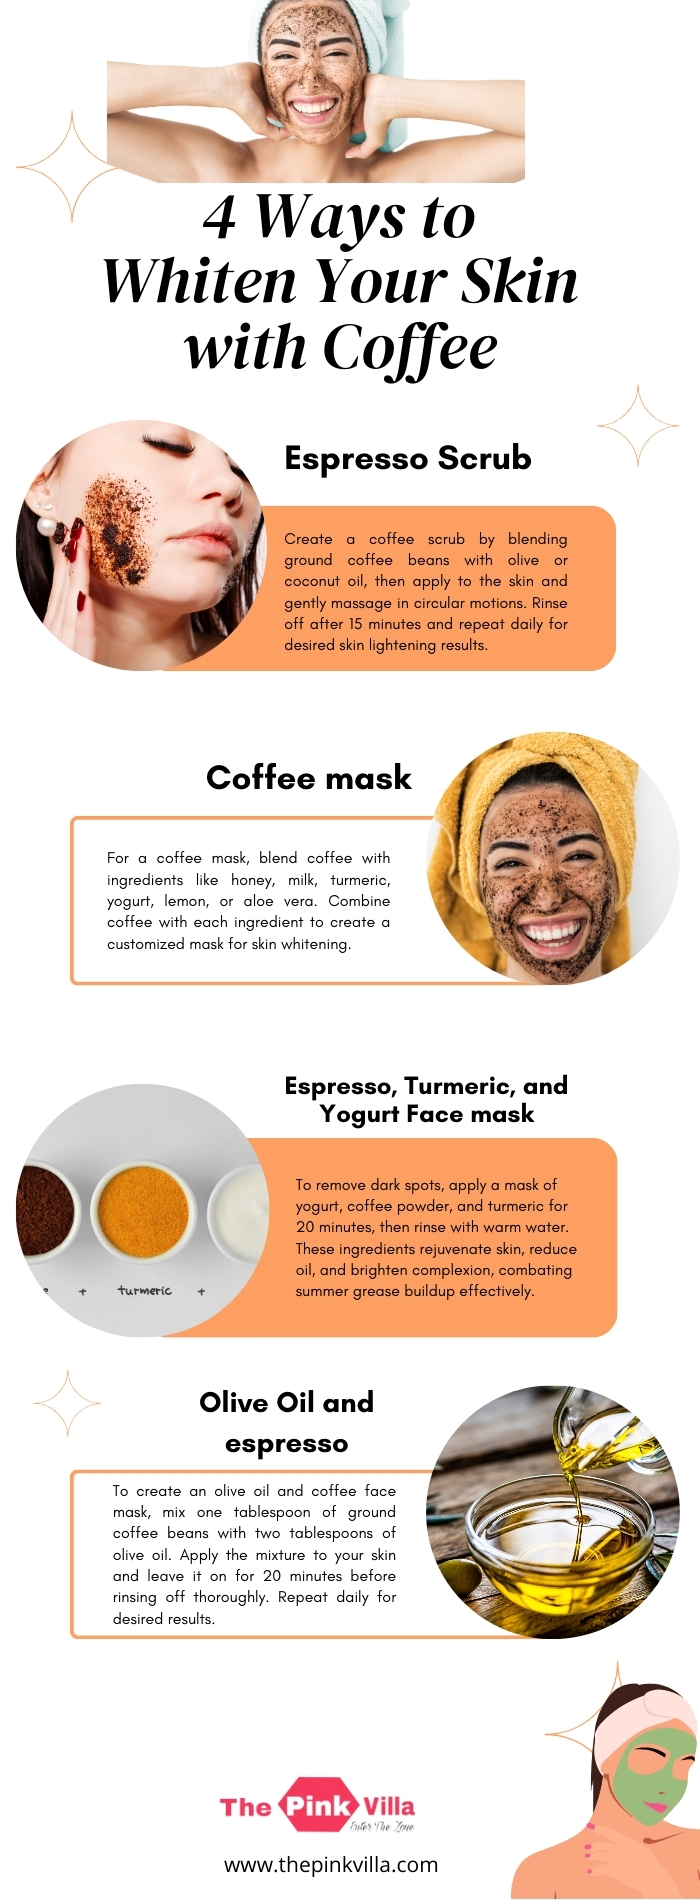 4 Ways to Whiten Your Skin with Coffee